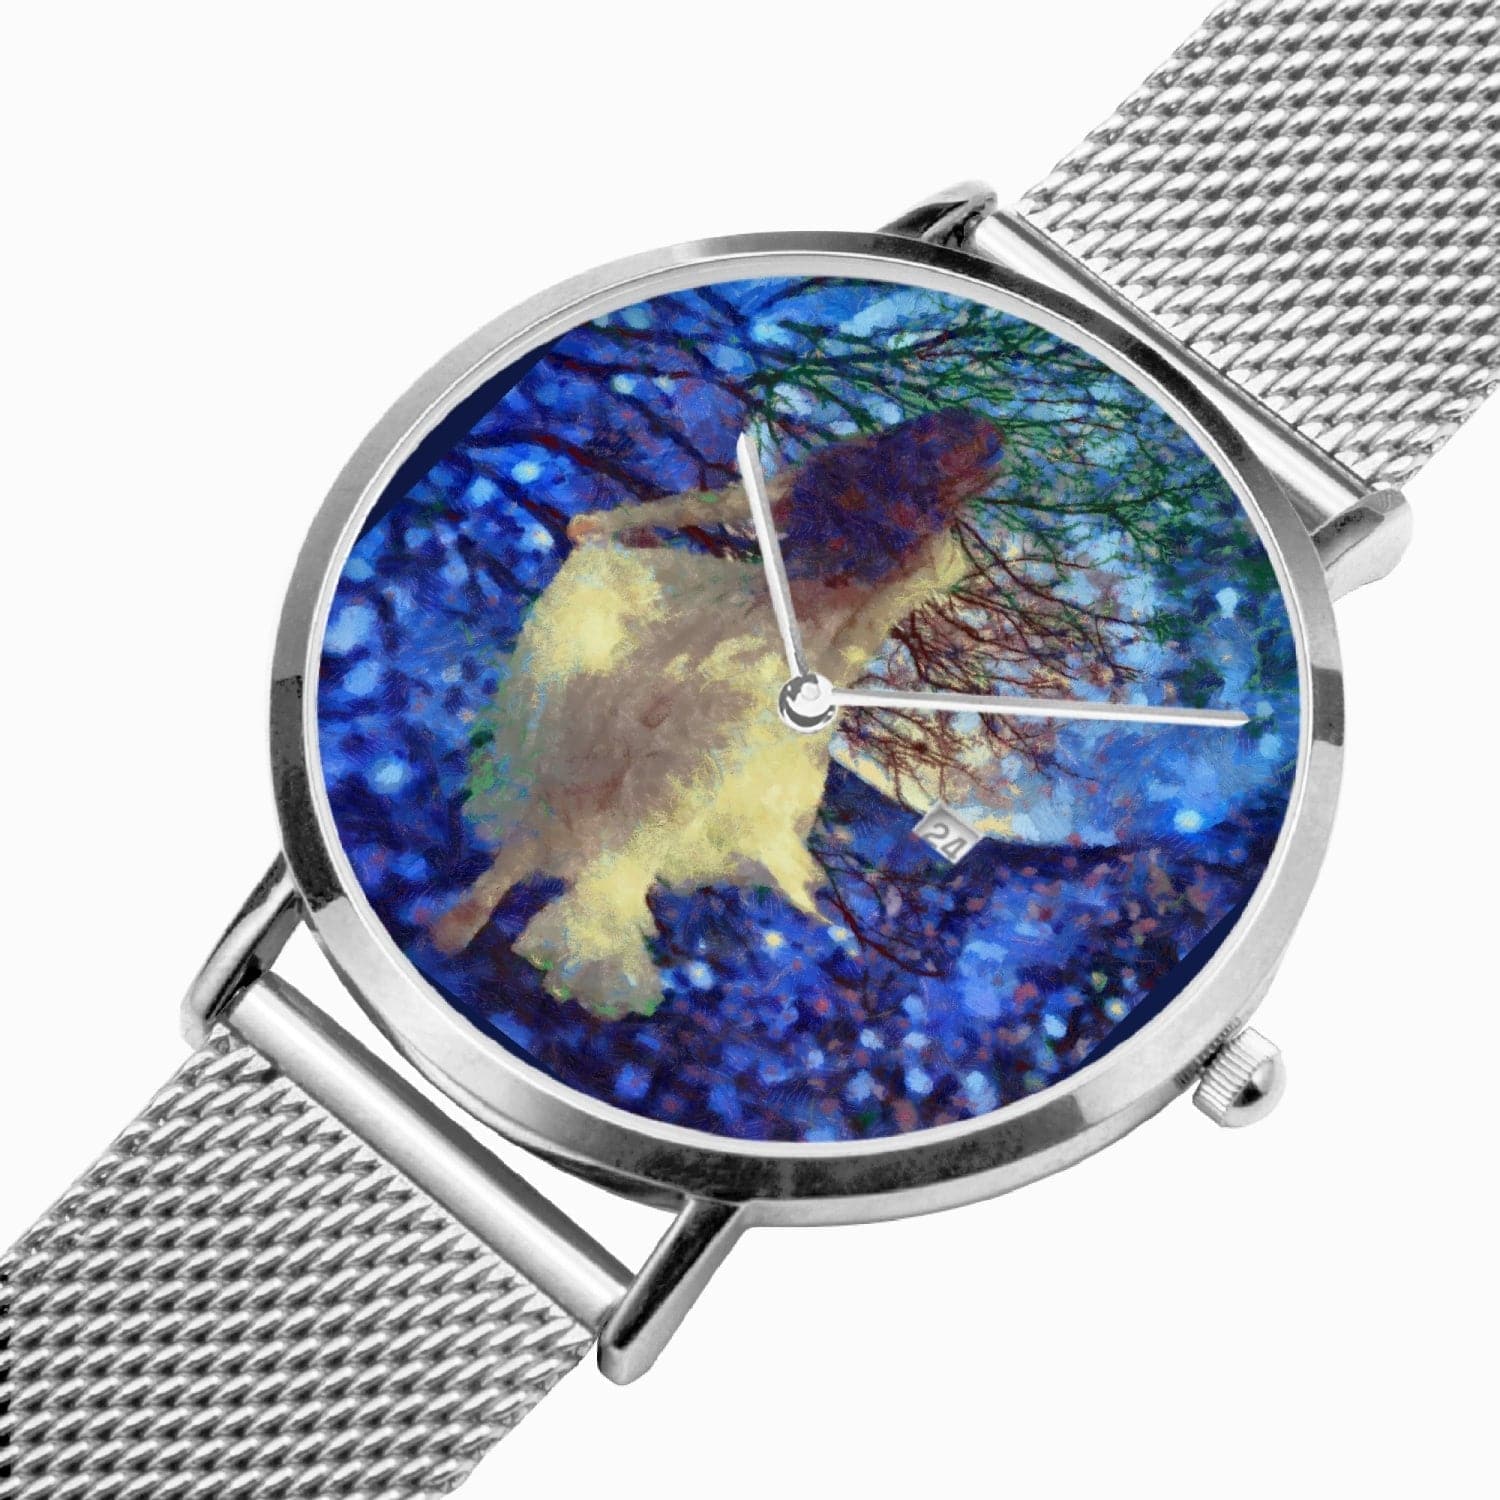 Lady and the Moon Stainless Steel Perpetual Calendar Quartz Watch. Designer watch by Humphrey Isselt